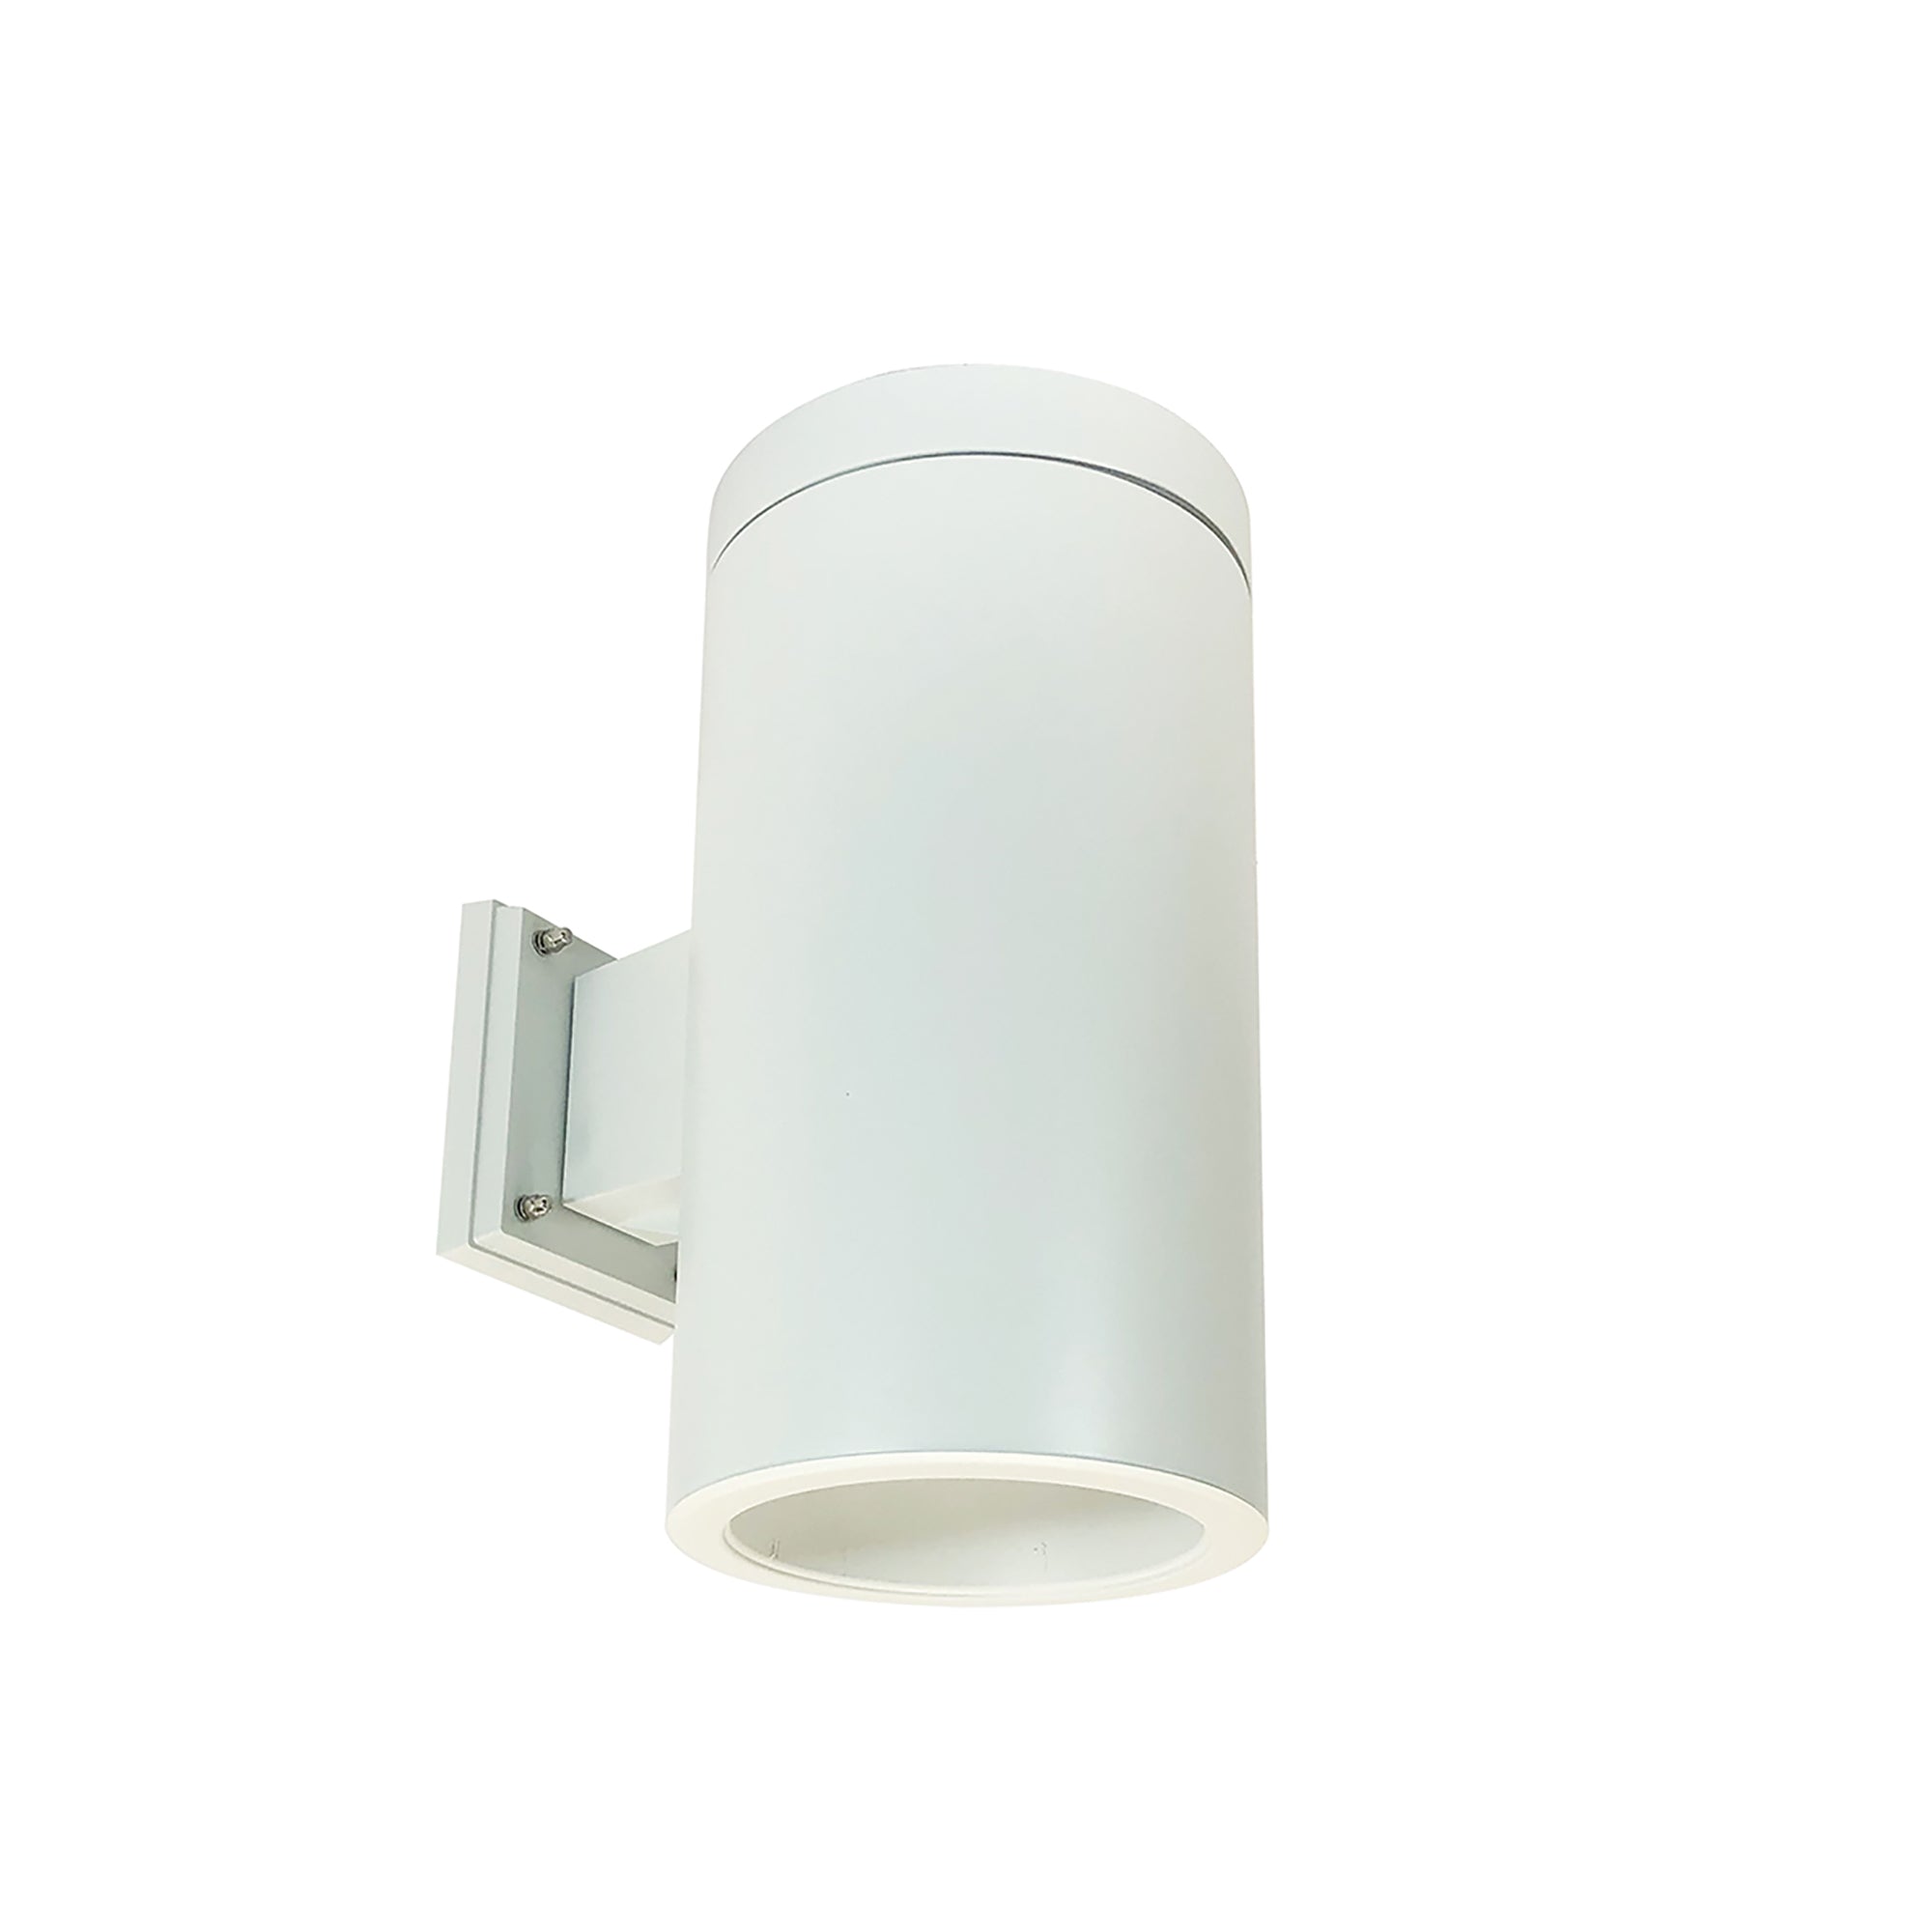 Nora Lighting NYLS2-6W25130SWWW6 - Cylinder - 6 Inch CYL WALL 2500LM SPOT REF 30K WH/WH WH CYL 120/277V 0-10V